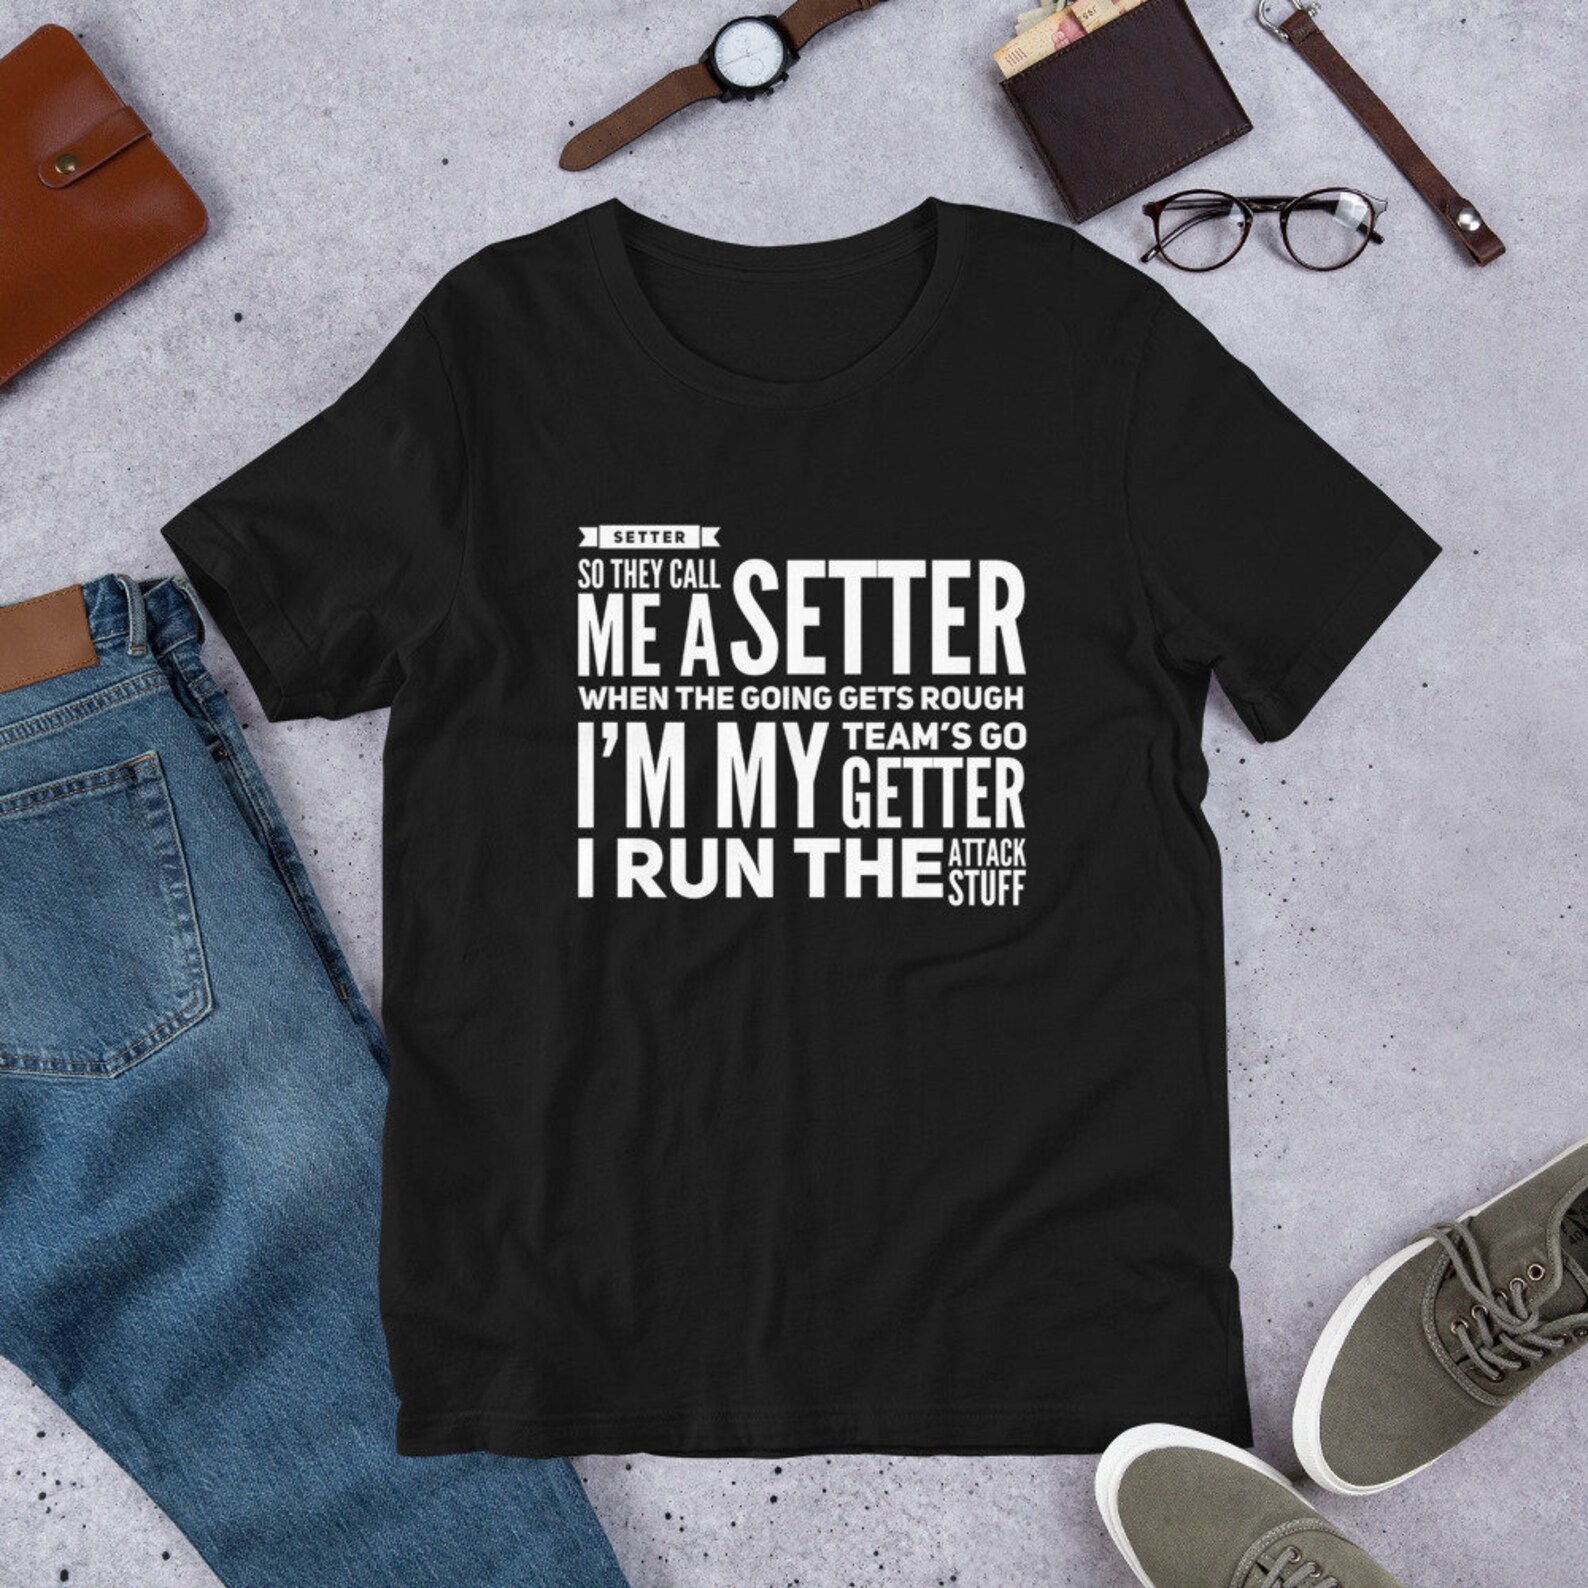 So They Call Me A Setter

When The Going Gets Rough

Im My Team's Go Getter

I Run The Attack Stuff

Setter Volleyball Shirts on ETSY by Volleybragswag